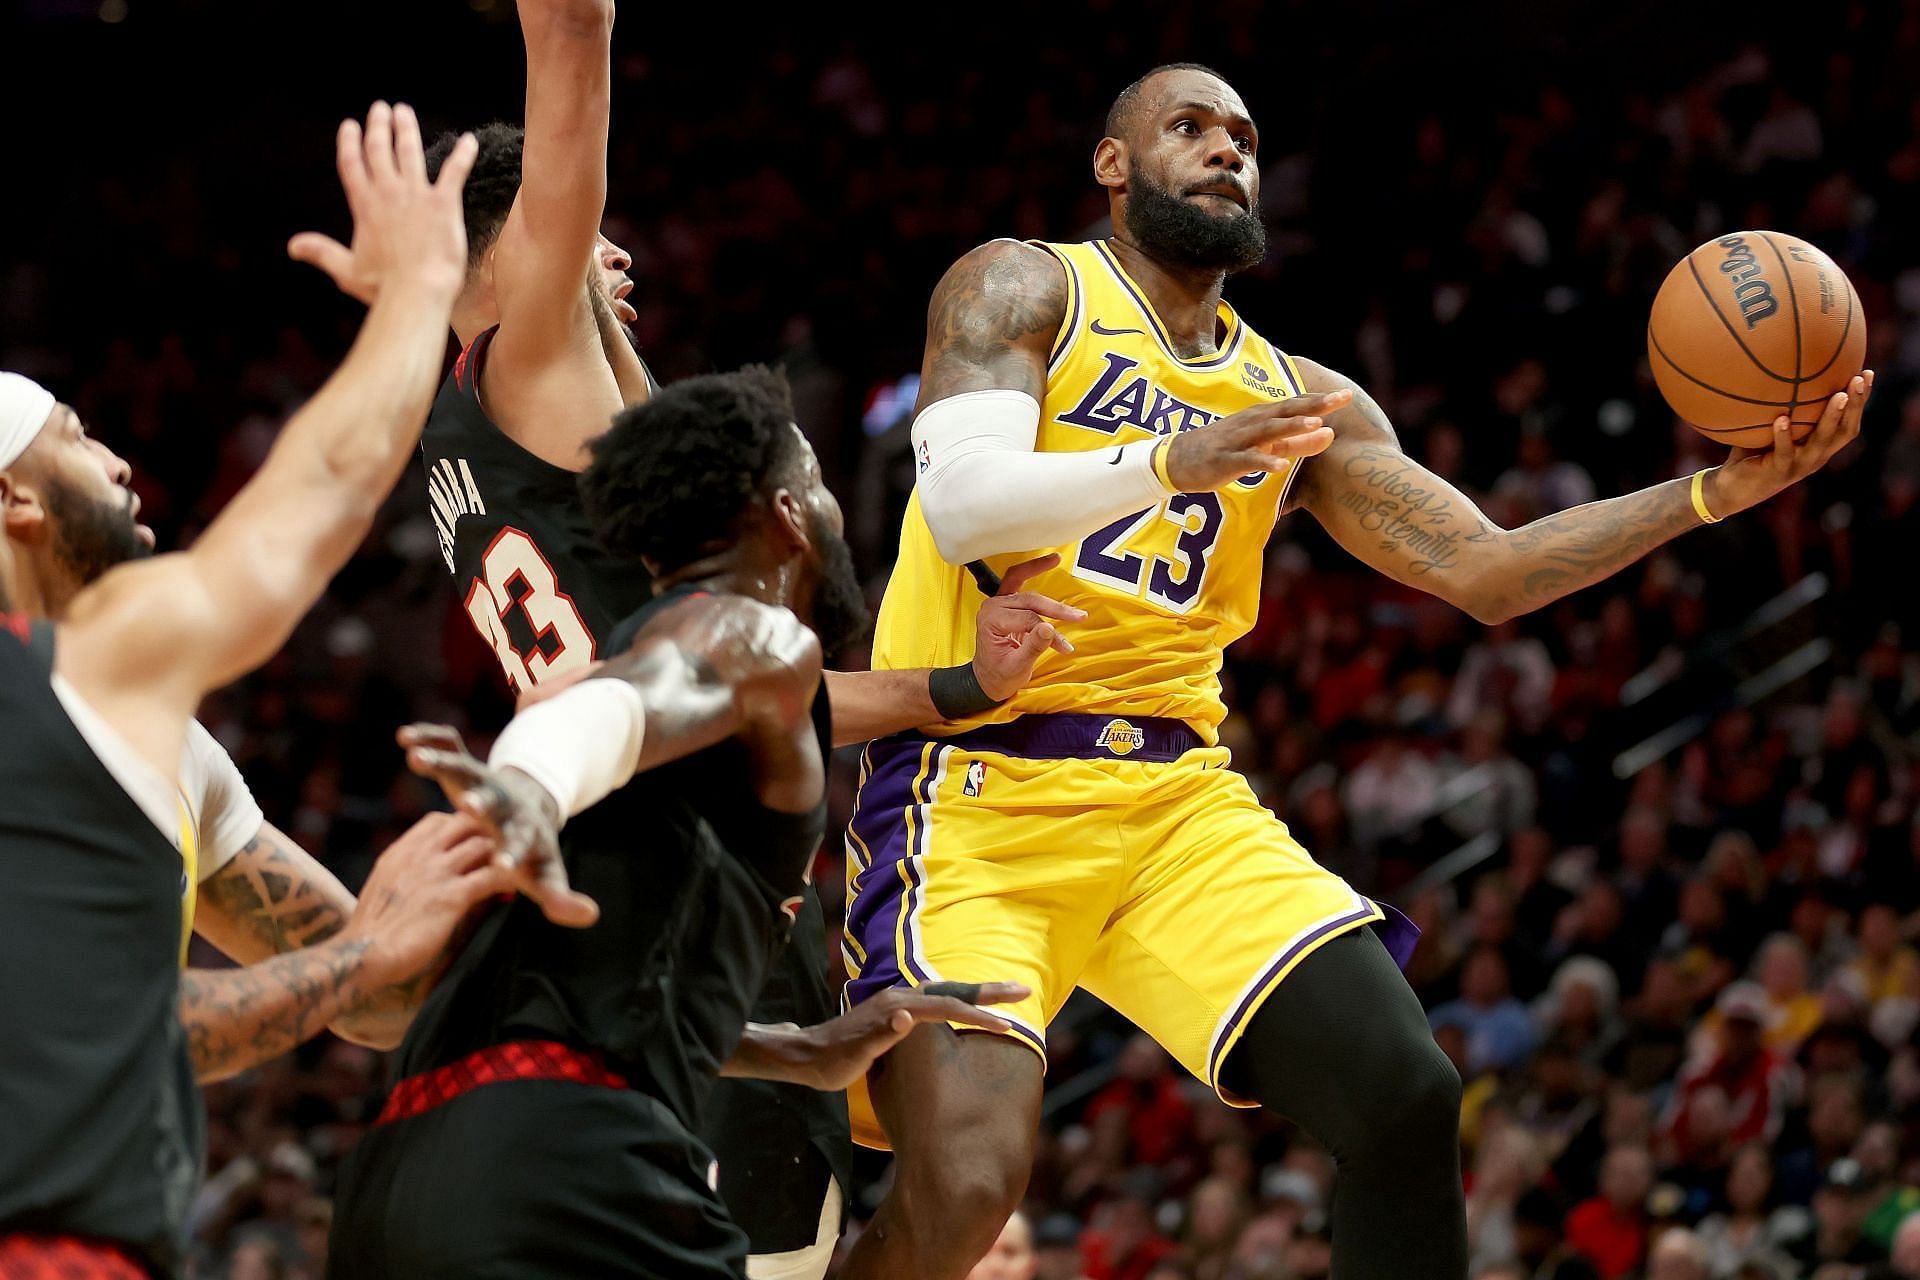 Lakers fans heave a sigh of relief as LeBron James and Co. put away lowly Blazers 